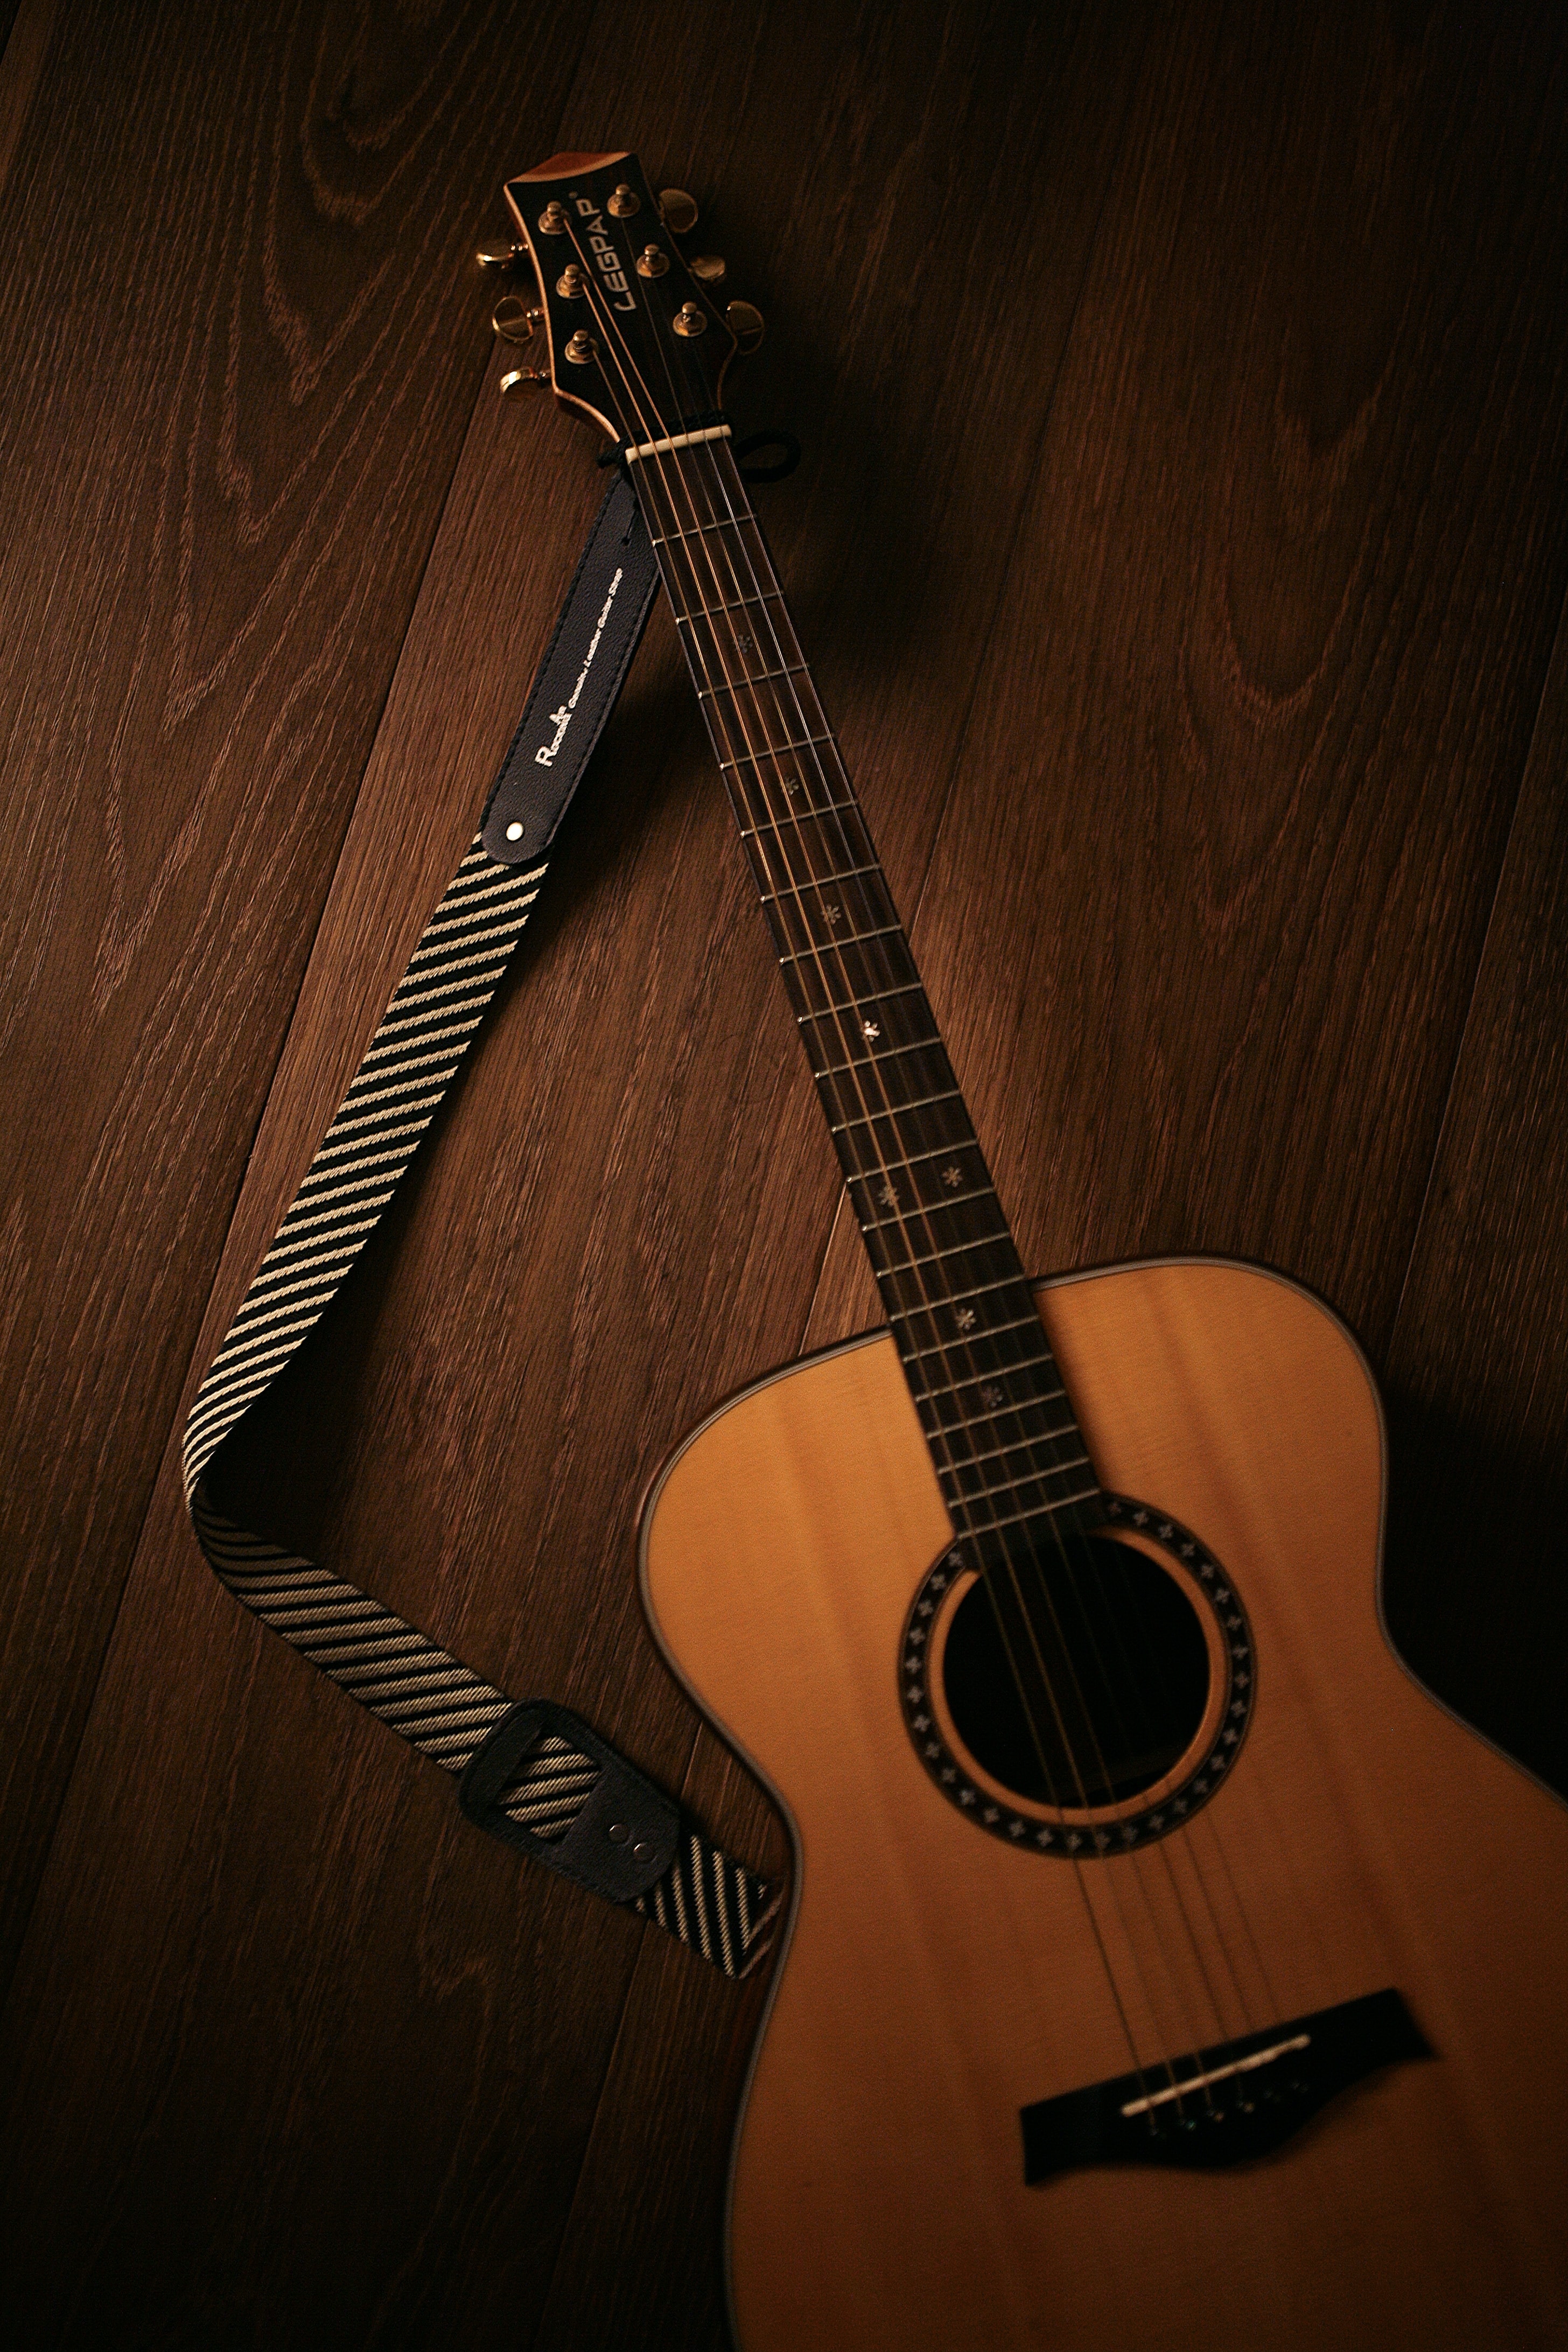 guitar, music, brown, acoustic guitar, musical instrument, wood, wooden Free Stock Photo